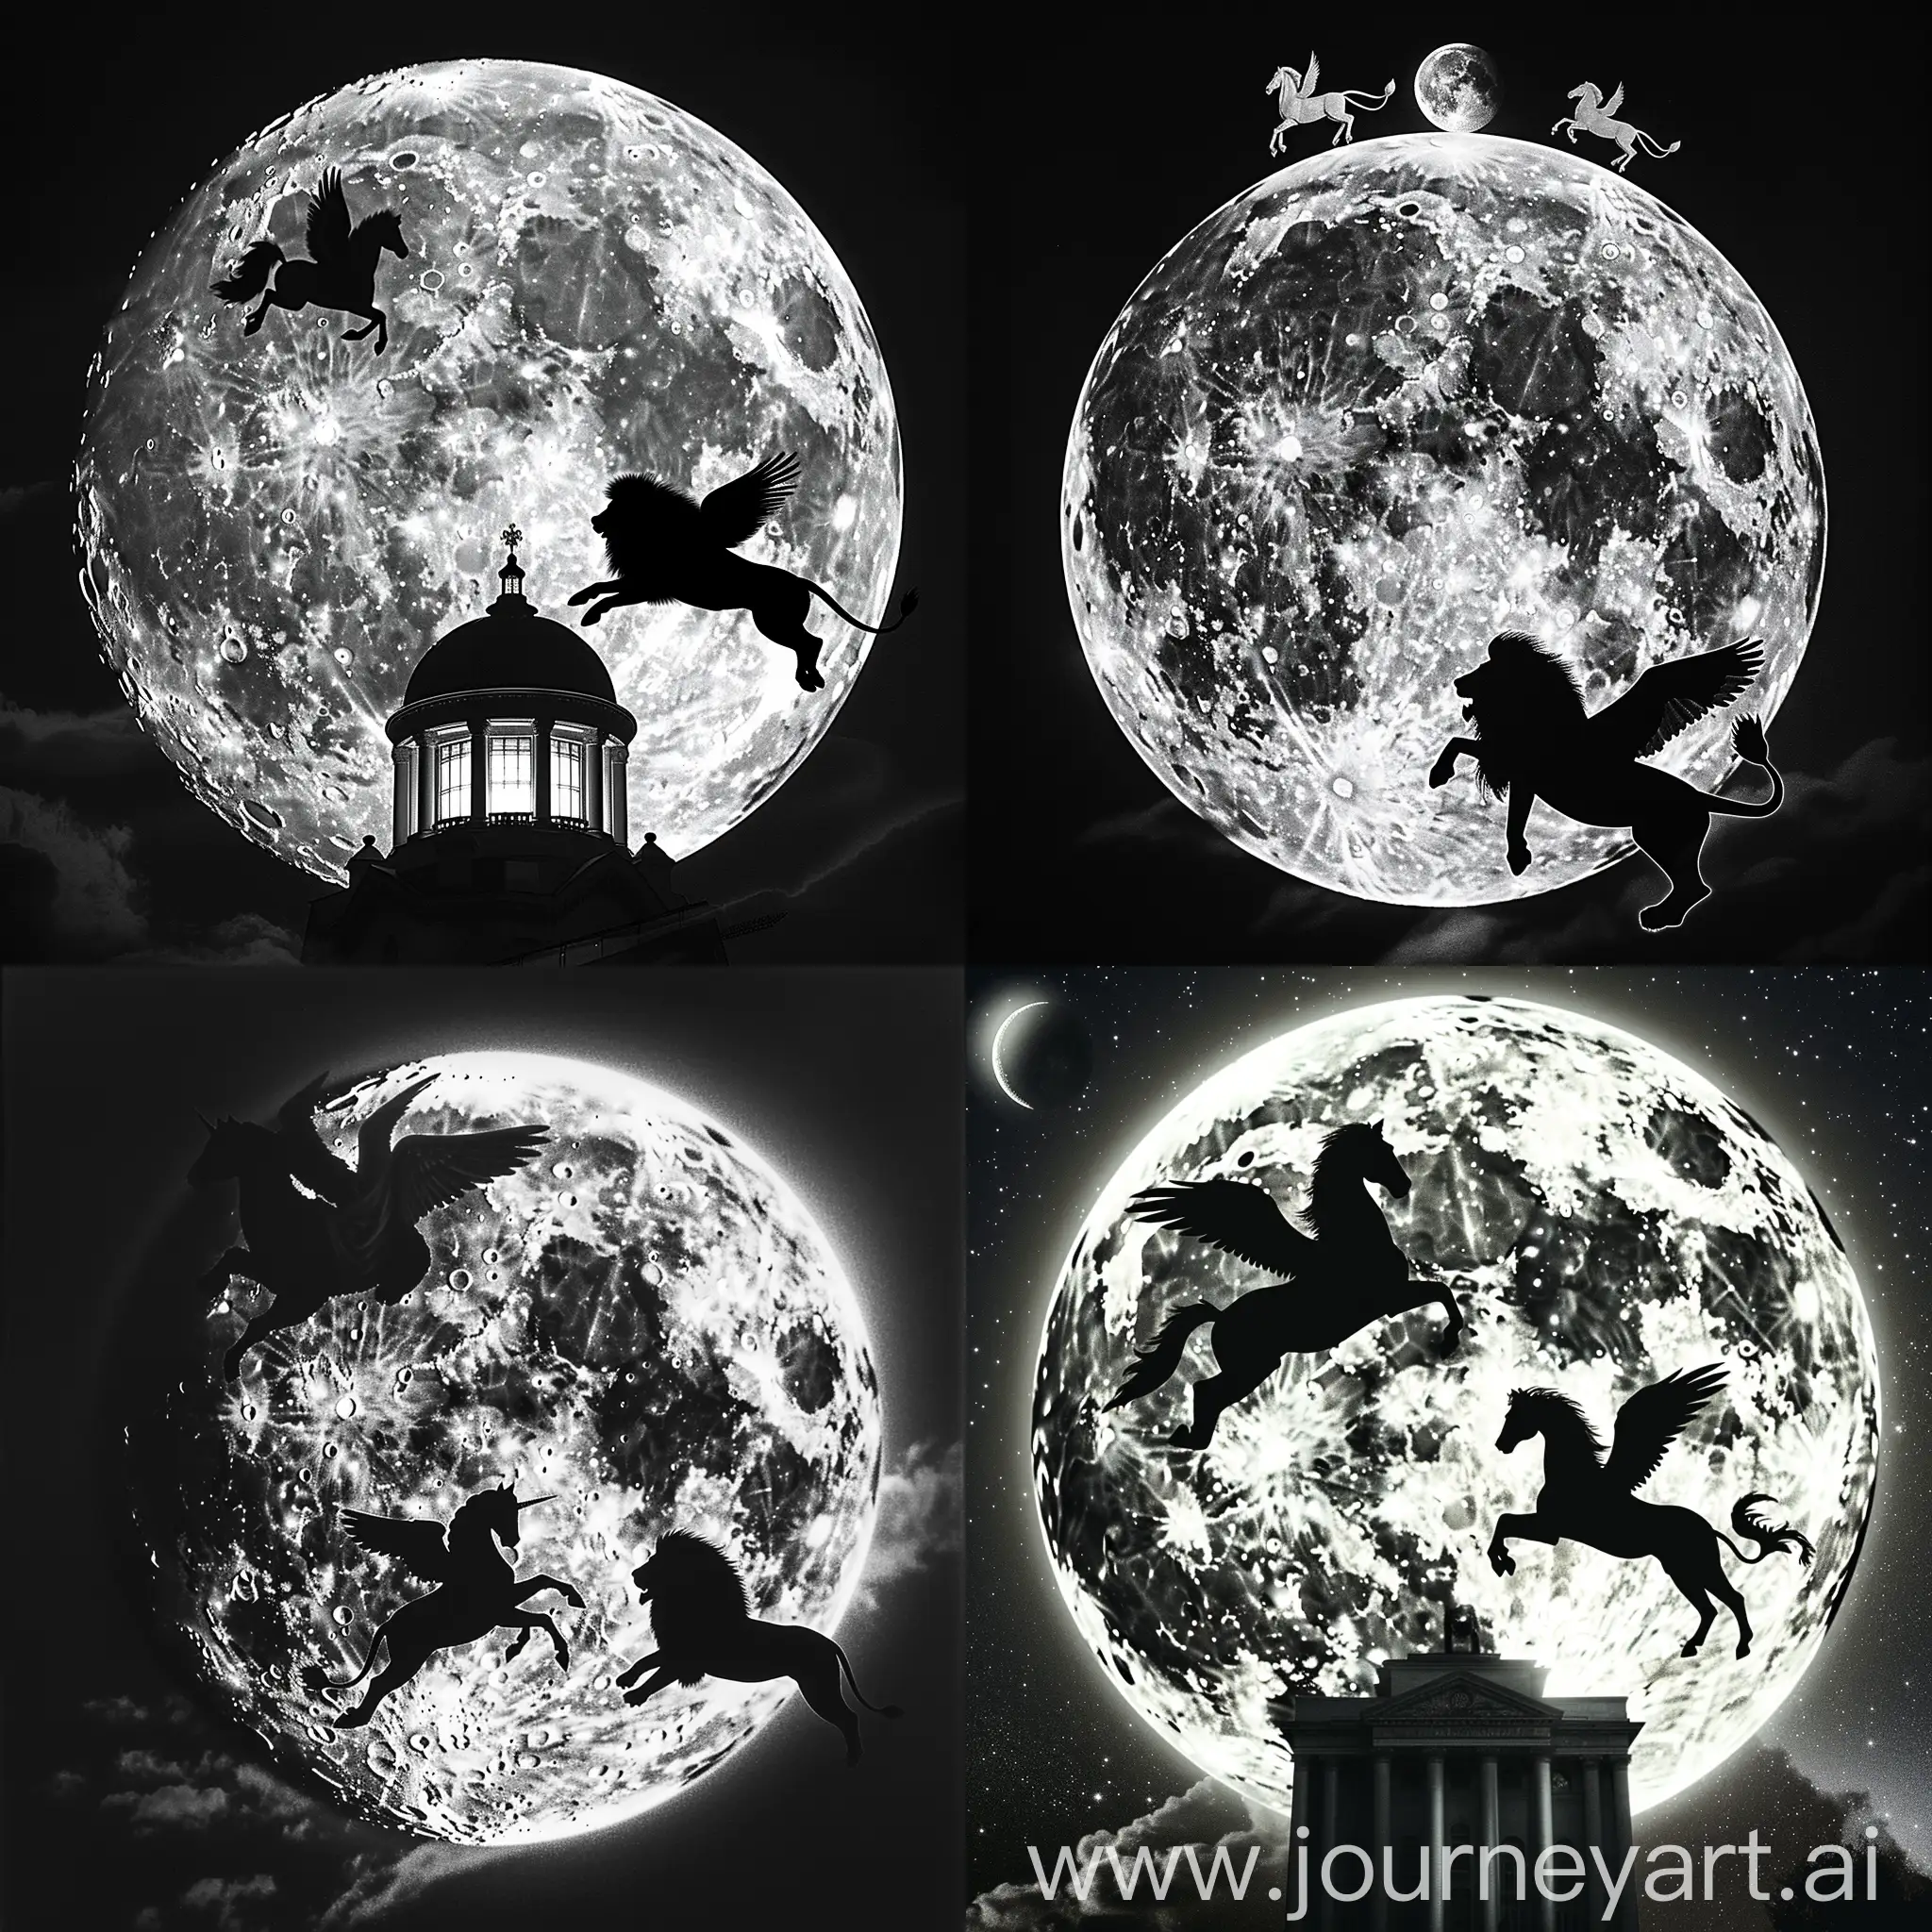 Majestic-Pegasus-and-Lion-Silhouettes-Soar-under-Full-Moon-over-Kyiv-Polytechnic-Institute